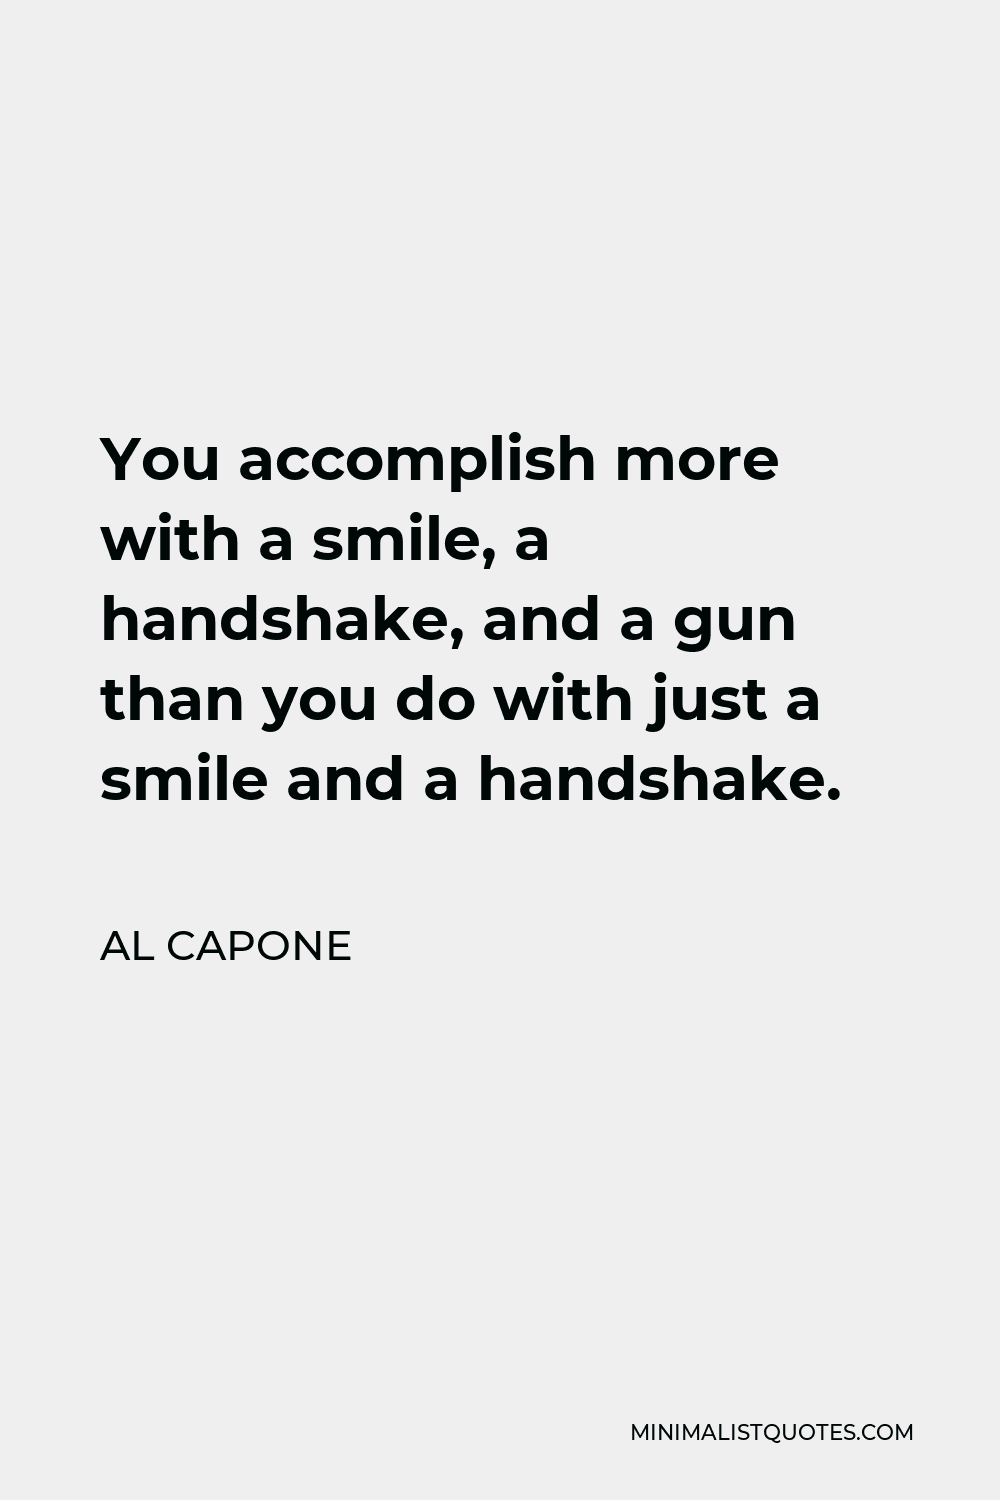 Al Capone Quote - You accomplish more with a smile, a handshake, and a gun than you do with just a smile and a handshake.